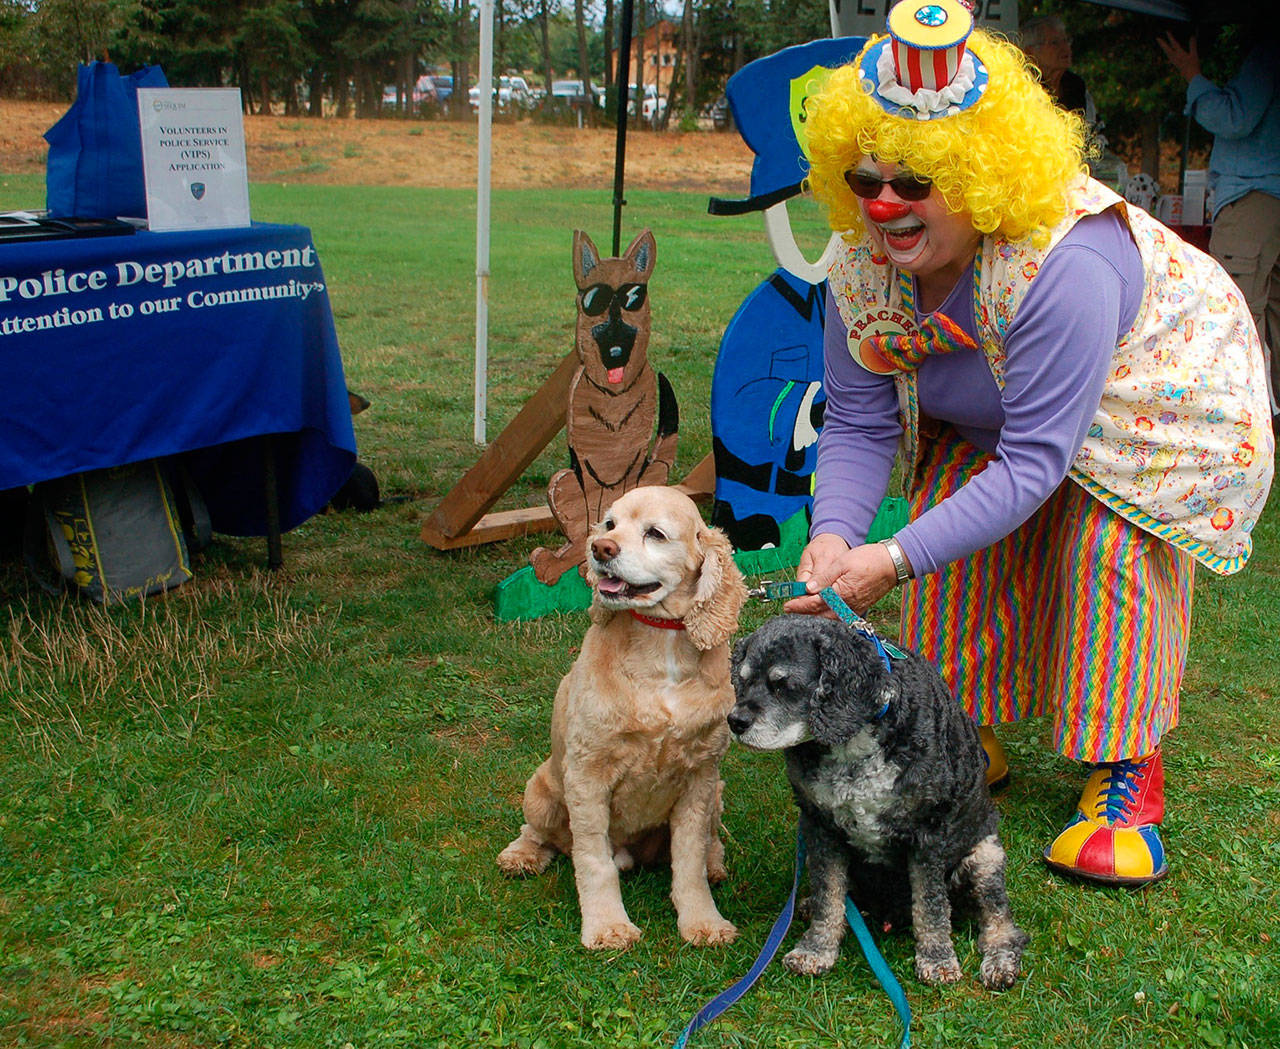 Naomi Foley, also known as “Peaches” the clown, takes a photo with two cockapoos Toby, left, and Barkley at the Sequim Dog Park’s 10th Anniversary celebration at Carrie Blake Community Park in 2017. (Erin Hawkins/Olympic Peninsula News Group)